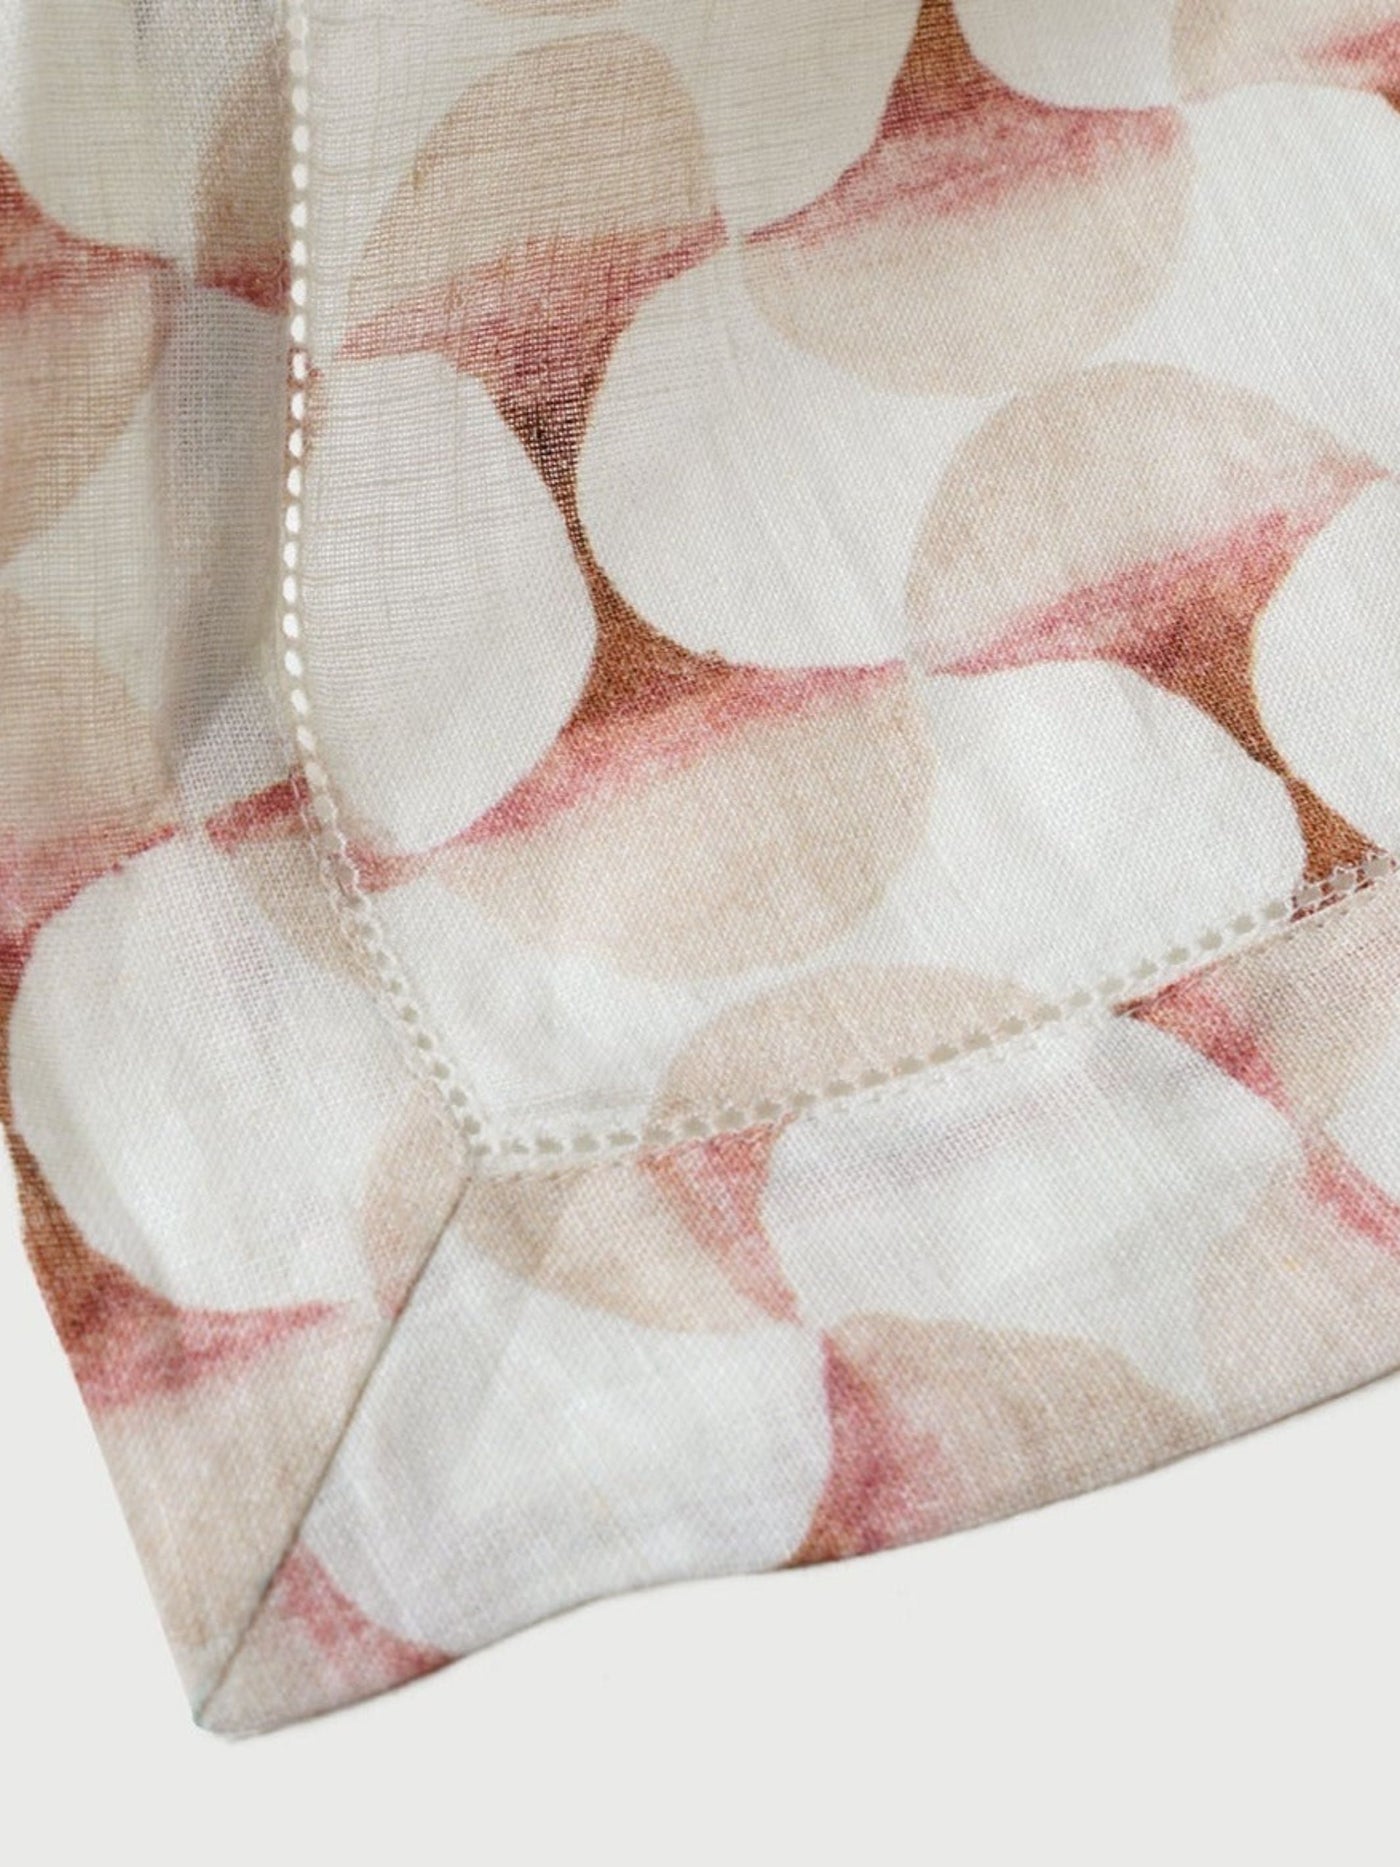 Cove Blush Table Cover